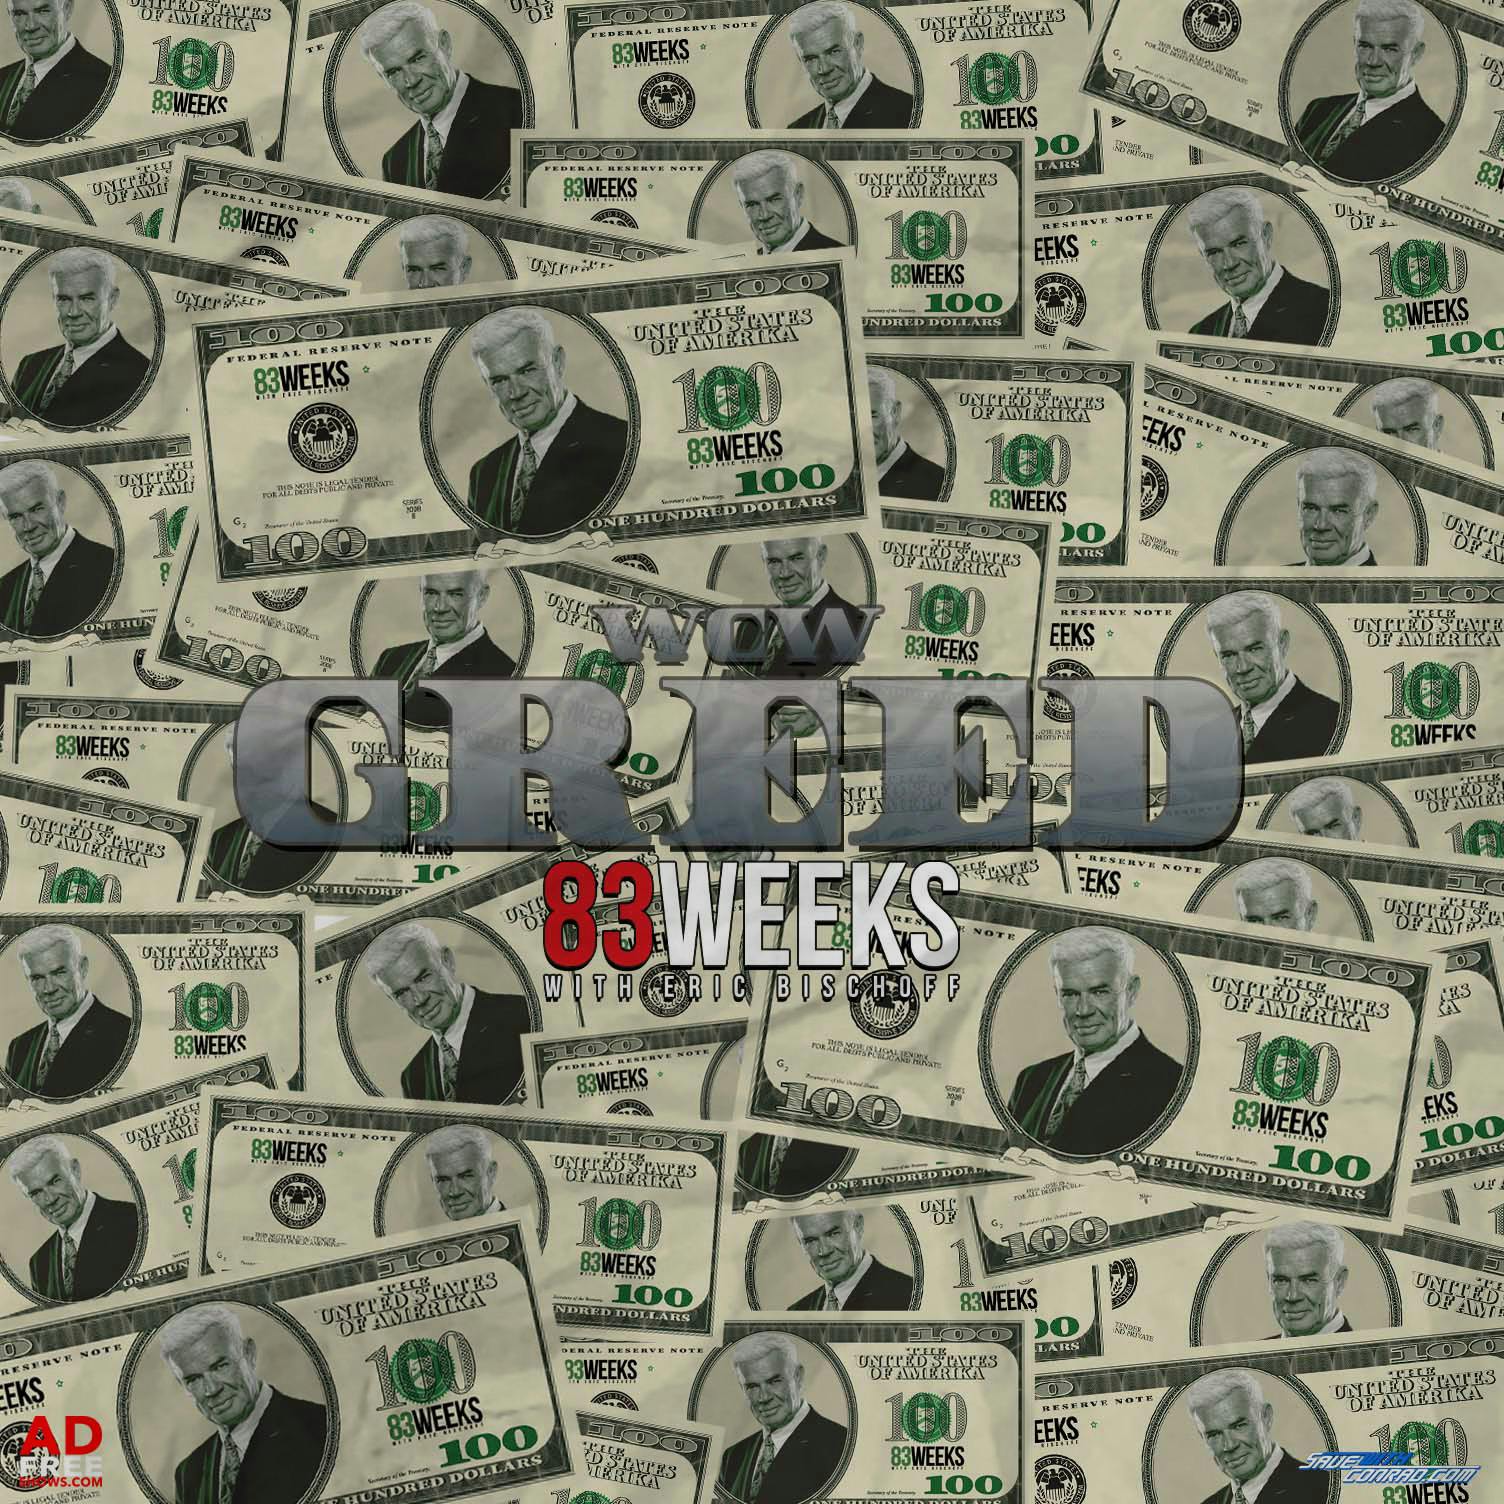 Episode 156: WCW GREED